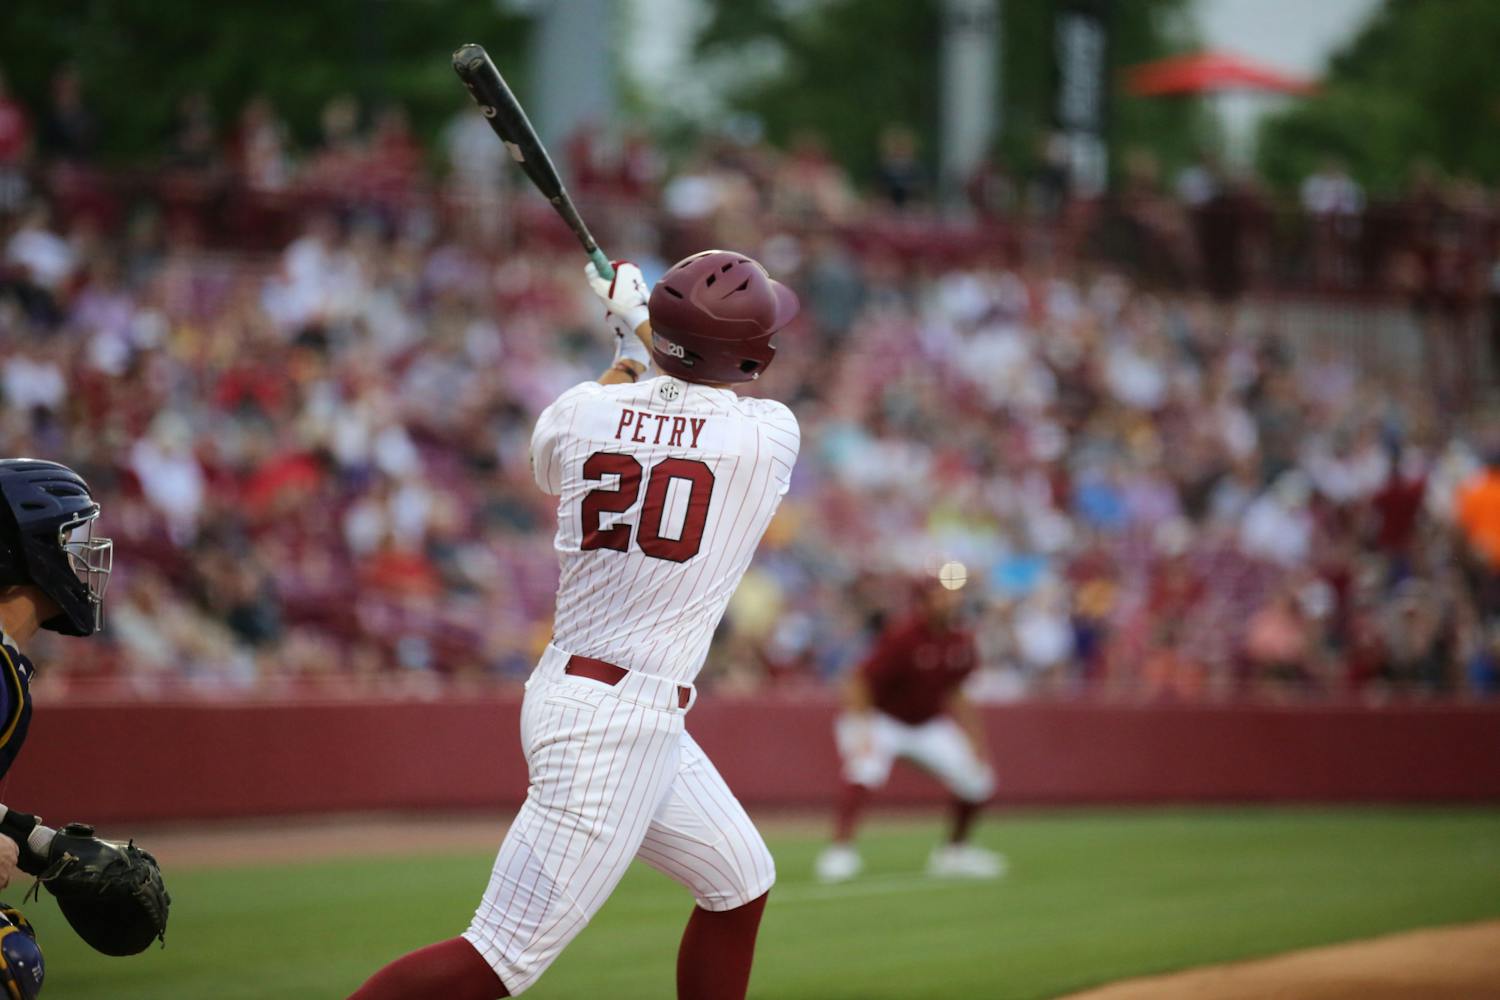 Freshman outfielder Ethan Petry hits a home run in his first at-bat of the game against LSU on April 6, 2023. This was the first of 13 runs for the Gamecocks in the series opener at Founders Park.